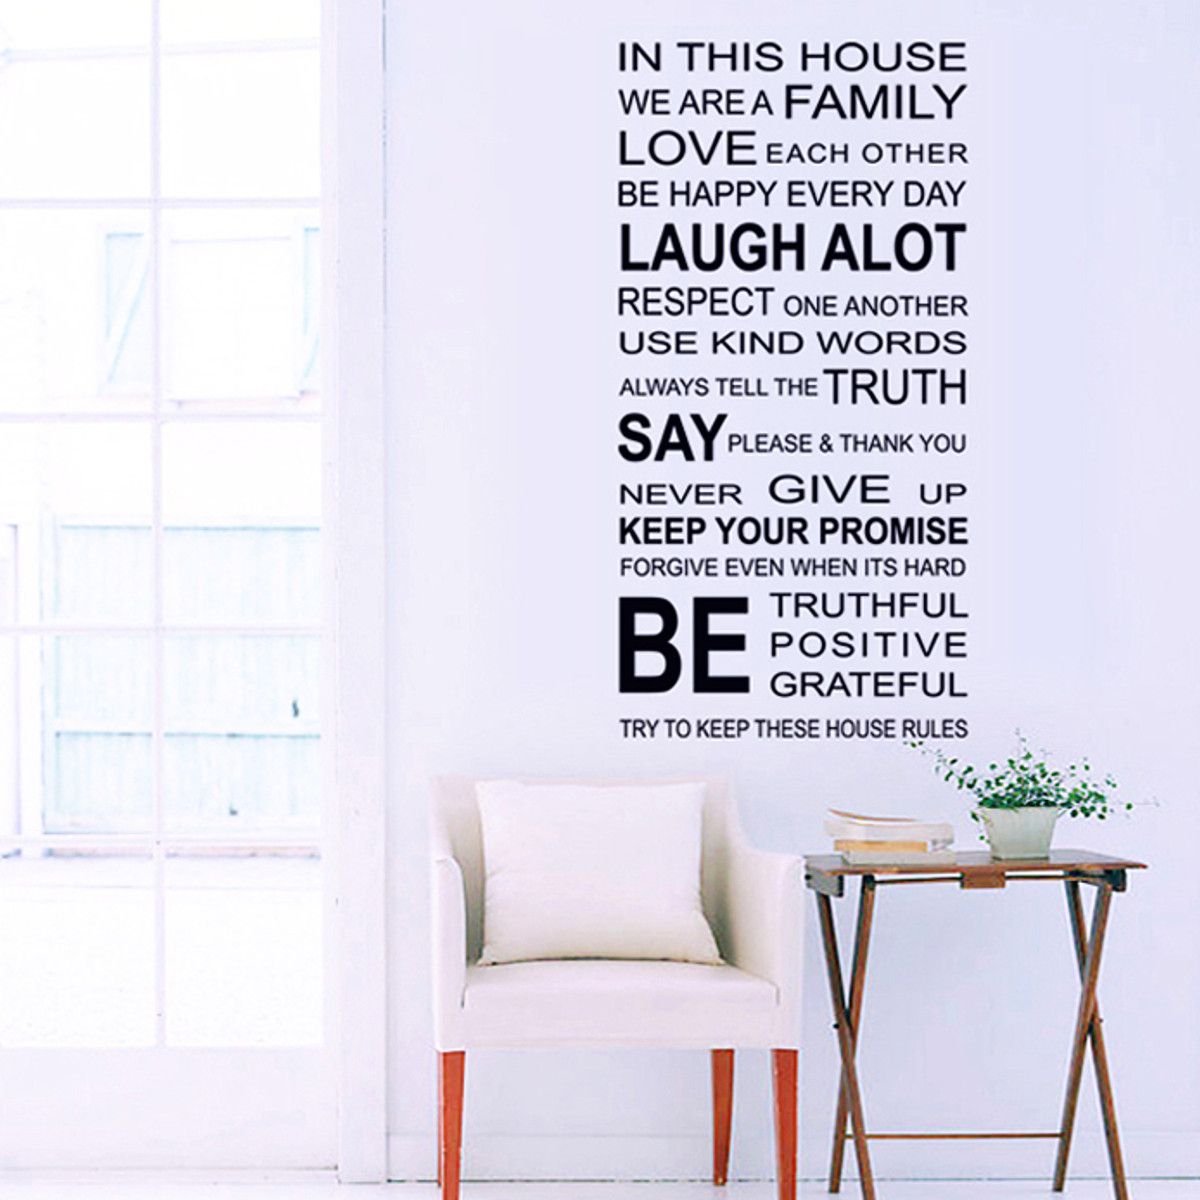 Removable-Vinyl-Decal-Art-Mural-Family-Home-Living-Room-Decor-Quote-Wall-Sticker-1433984